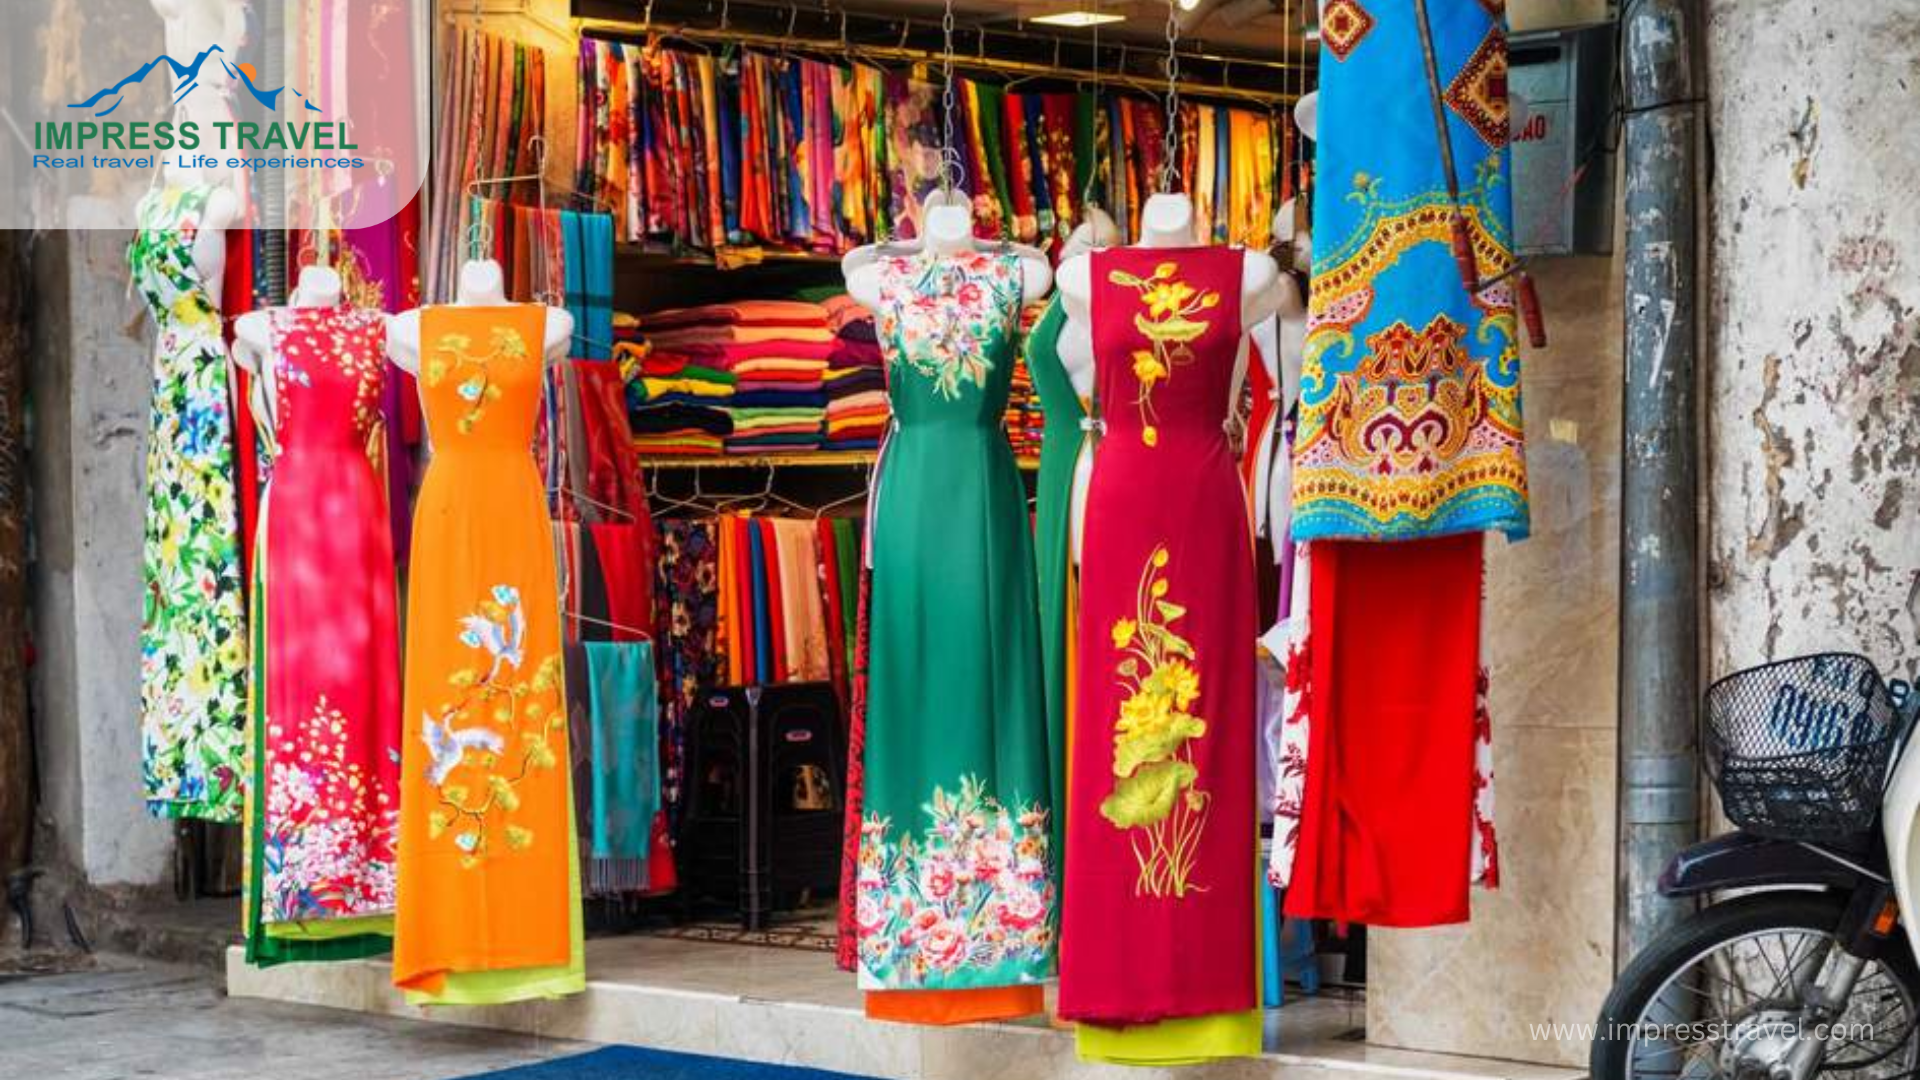 Shopping at renowned tailor shops in Hanoi